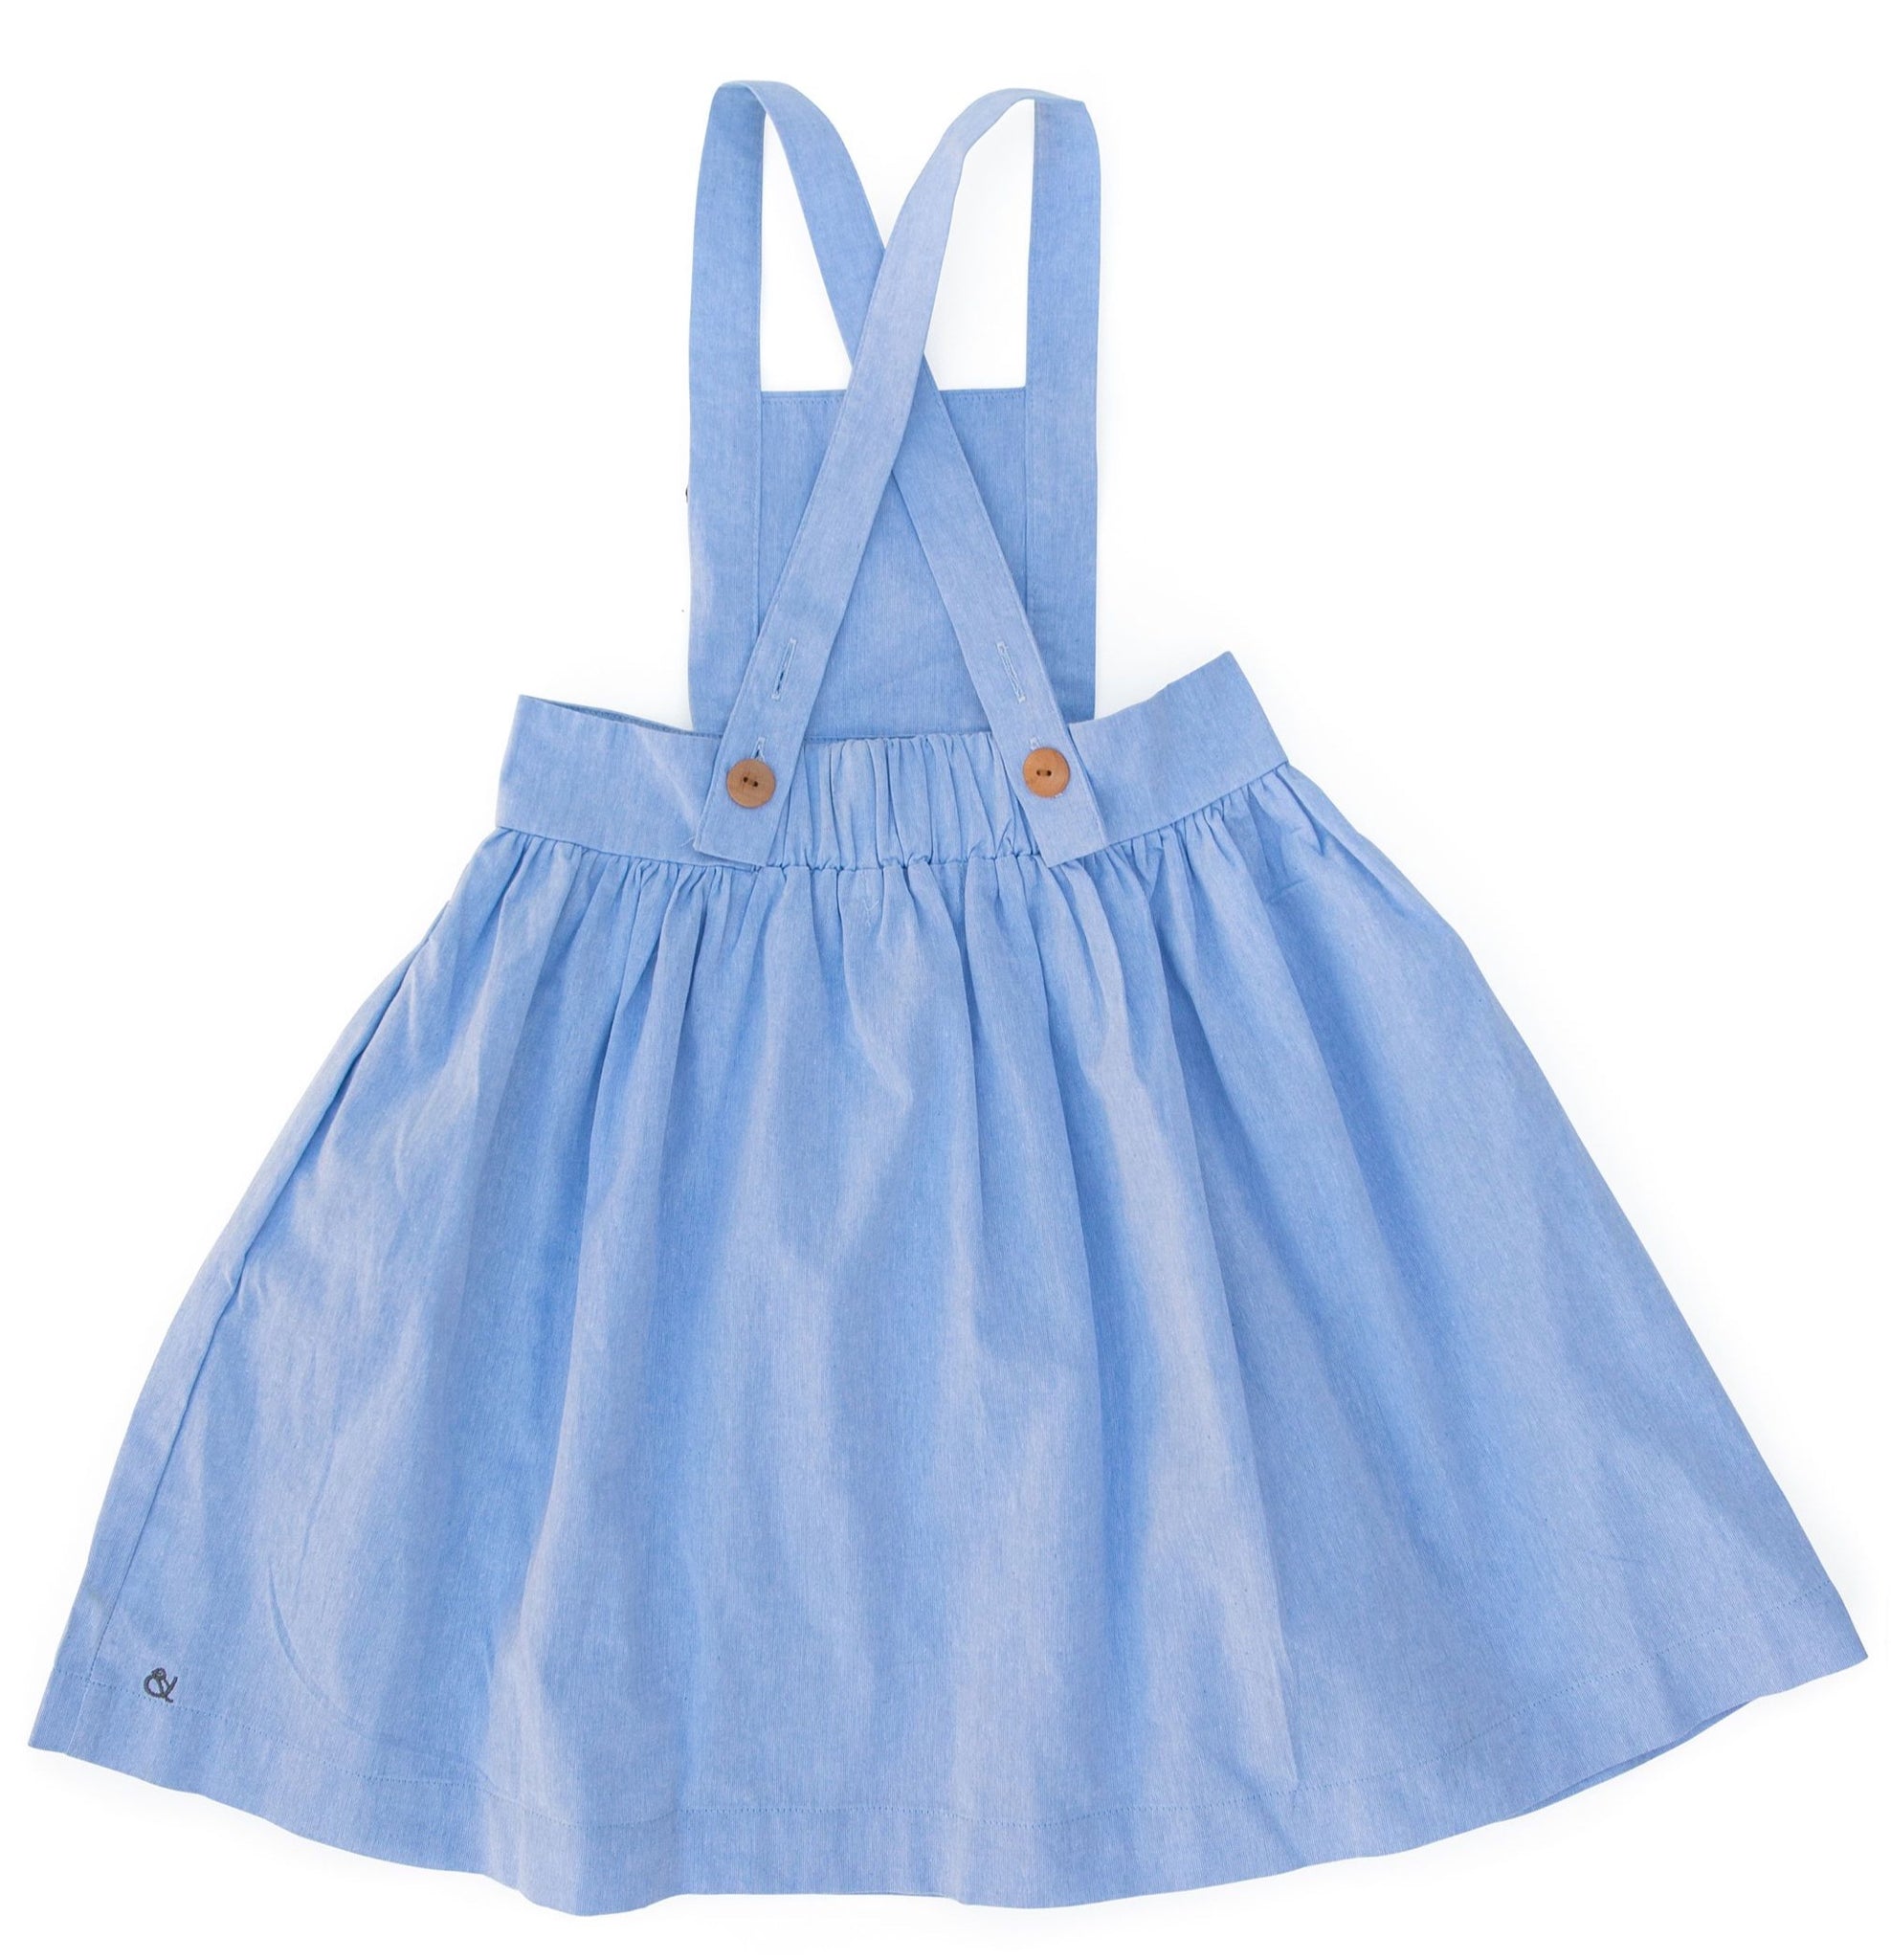 Apron Pinafore in Light Chambray – Wren and James